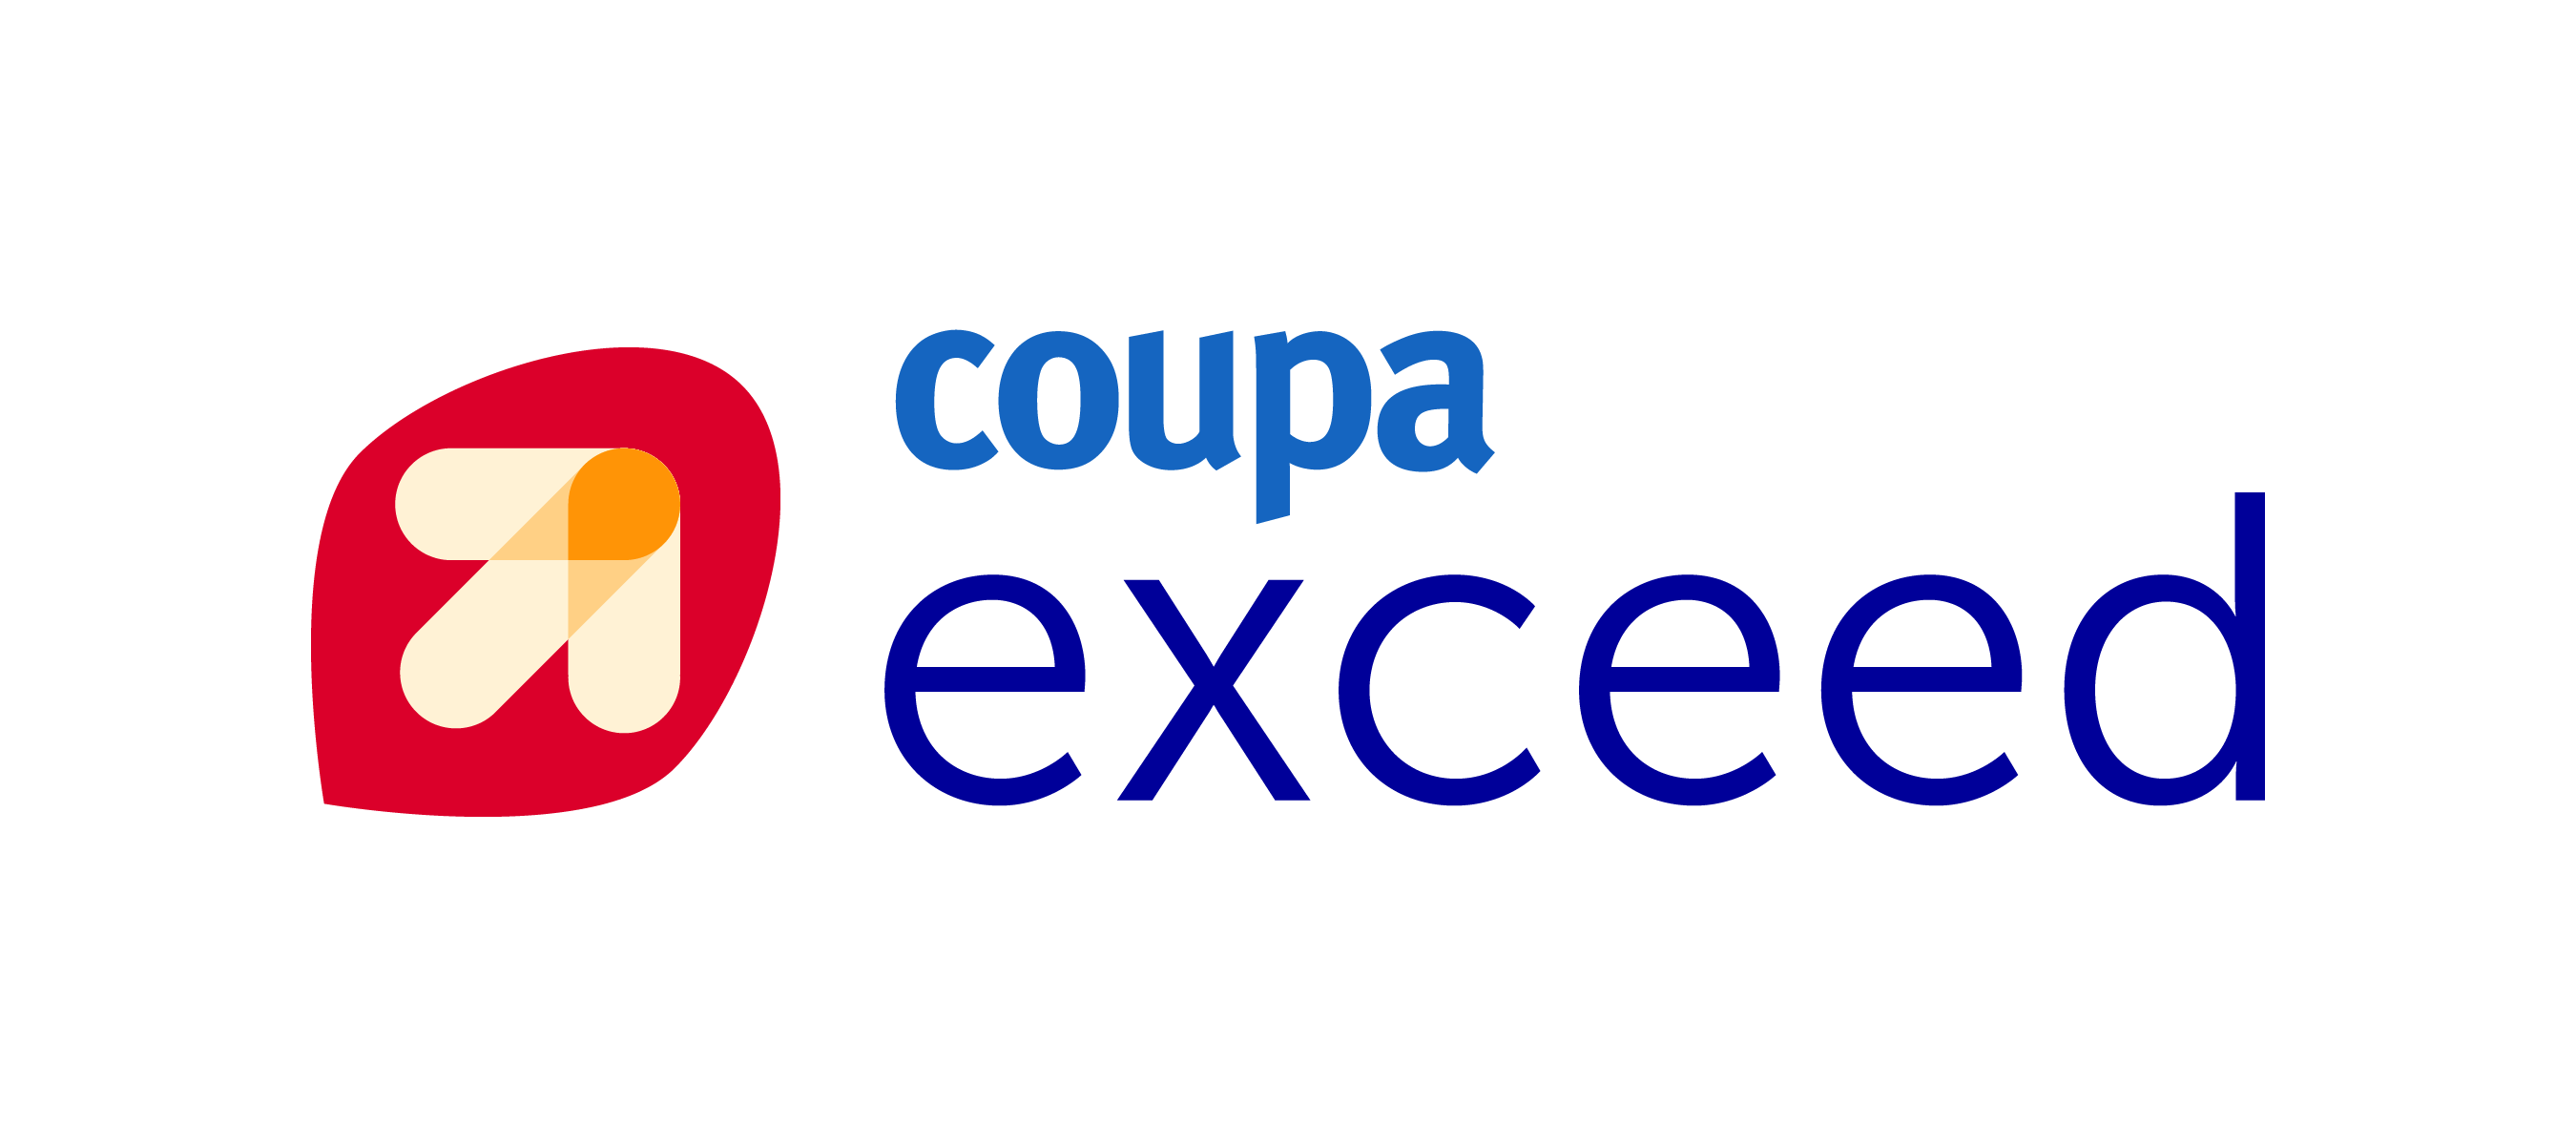 coupa exceed